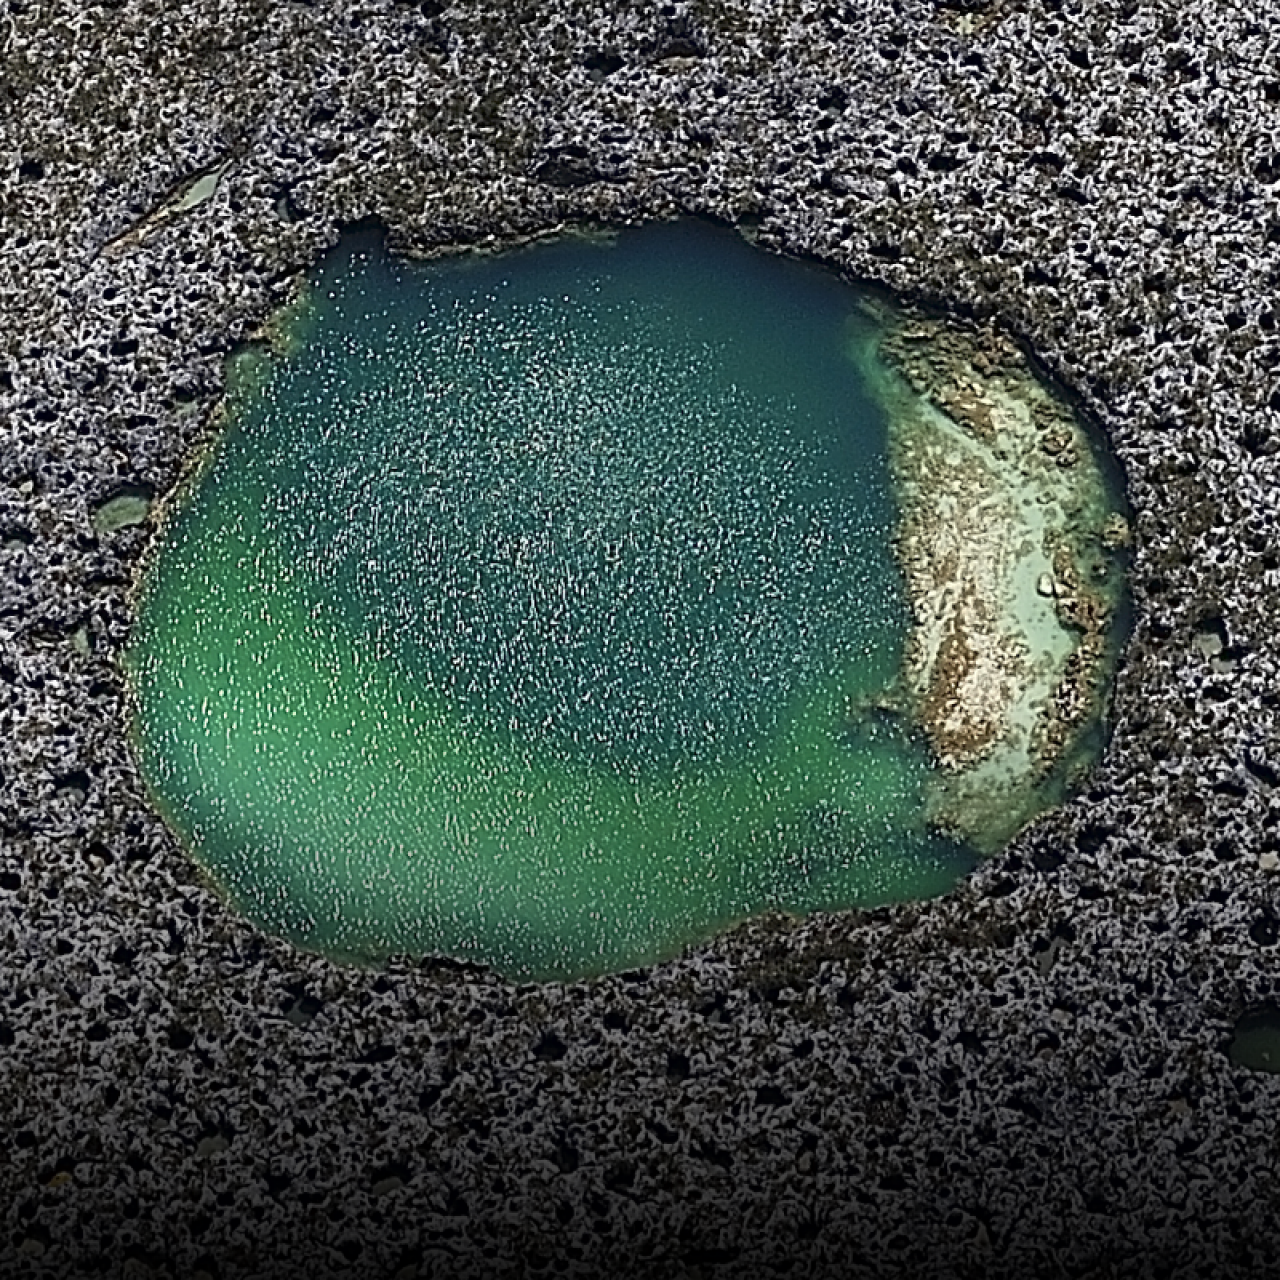 Researchers Discover Massive 900-Feet-Deep Blue Hole In Mexico